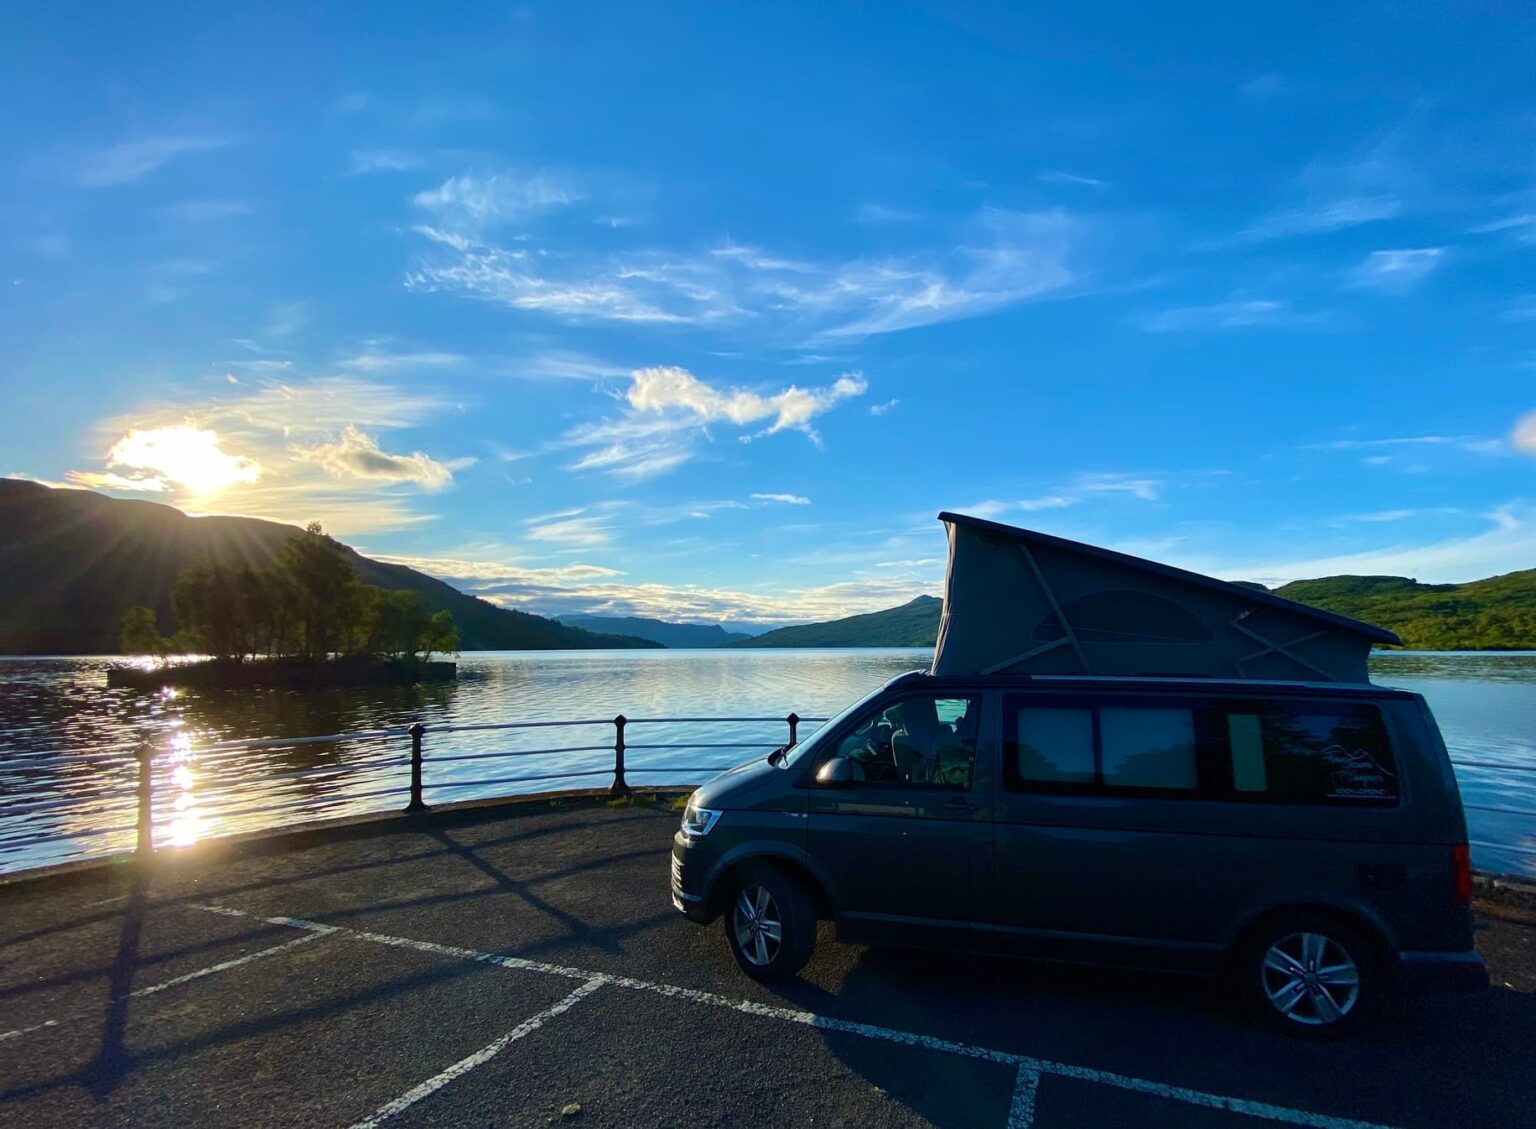 Campervan on Tour with Four Seasons Campers on the shore of Loch Katrine with bright blue sky